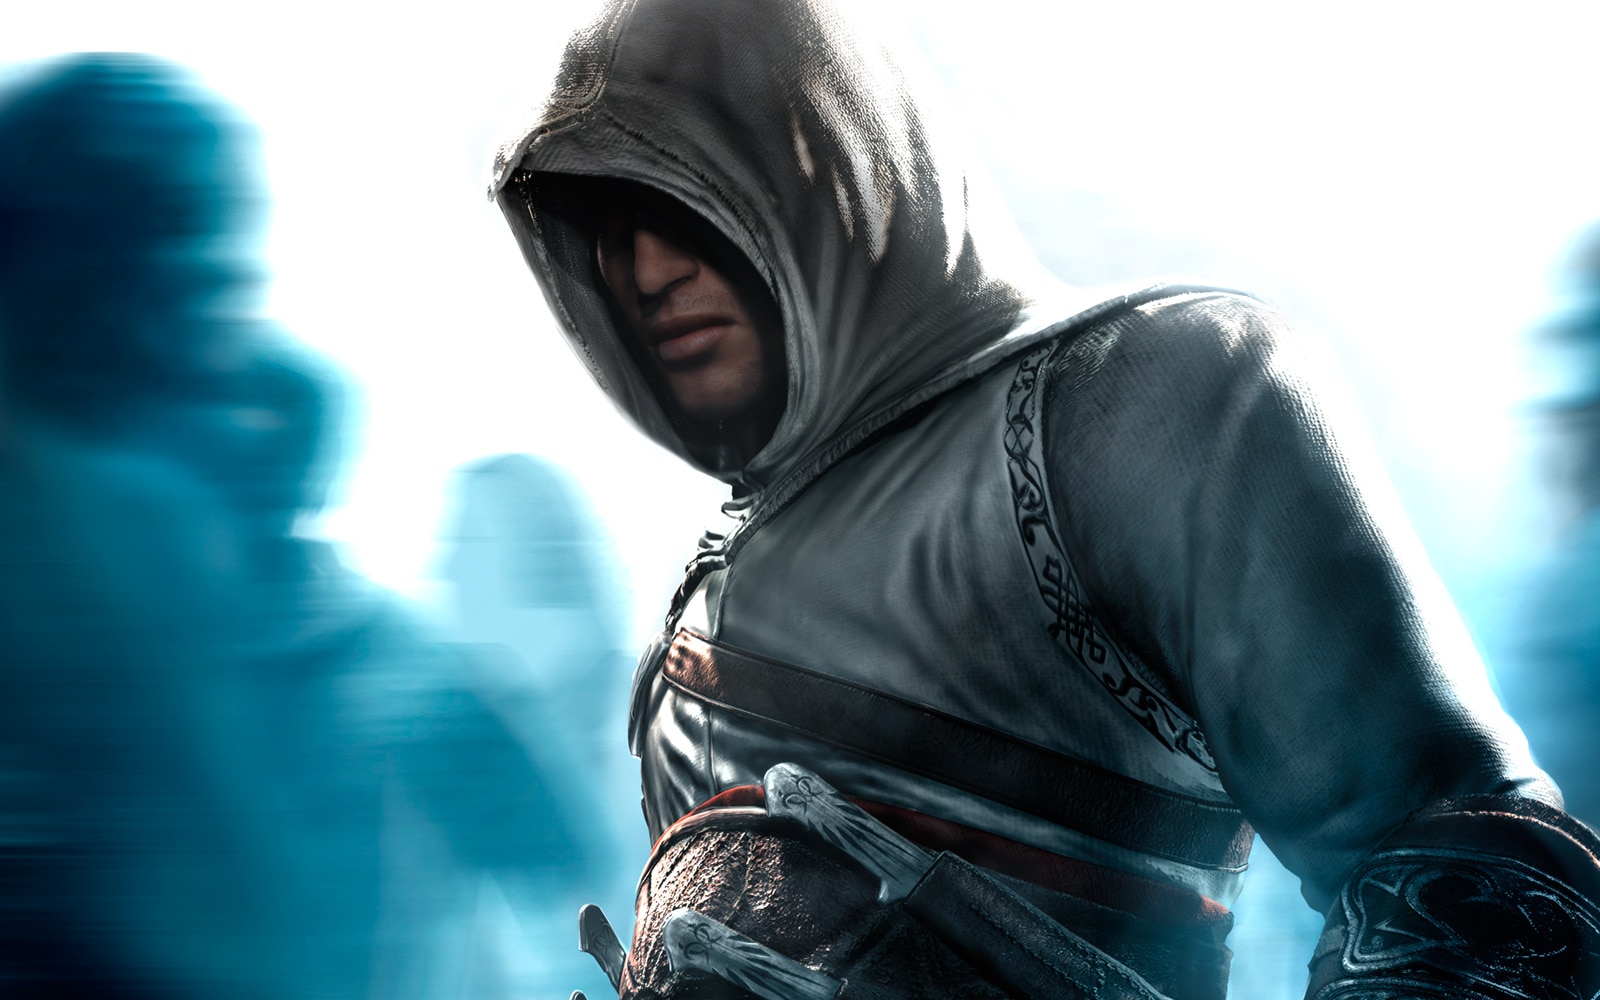 Assassin's Creed 1 